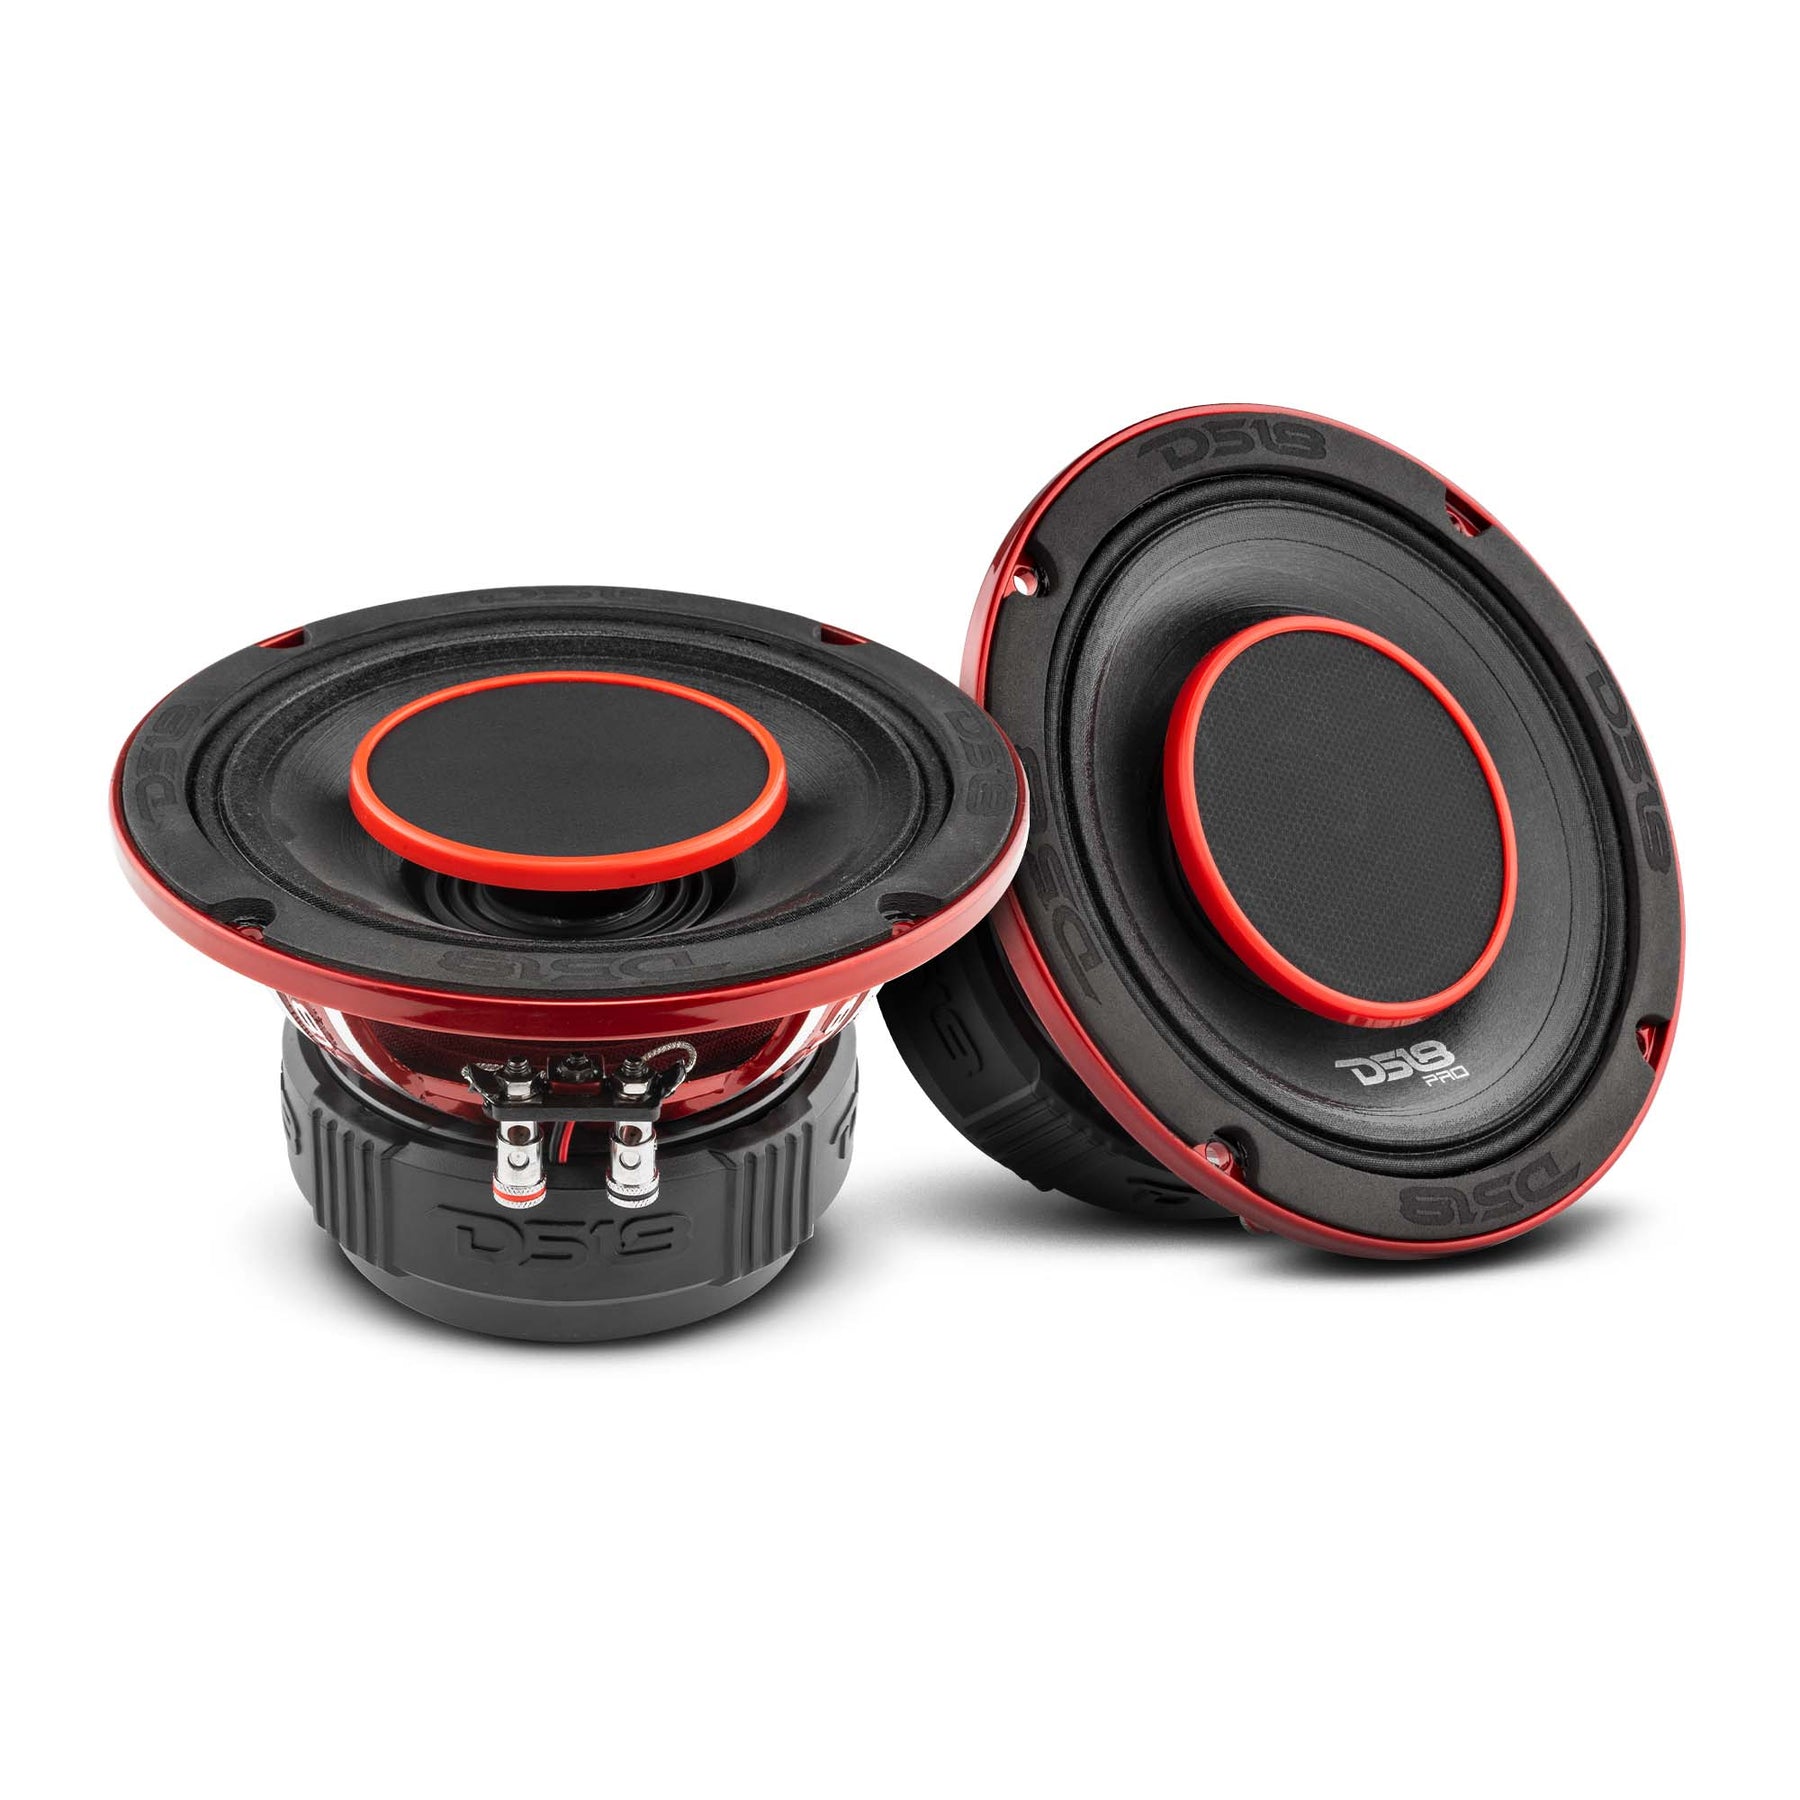 PRO 6.5" Coaxial Hybrid Mid-Range Water resistant Cone Loudspeaker with Built-in Driver 225 Watts Rms 4-Ohm